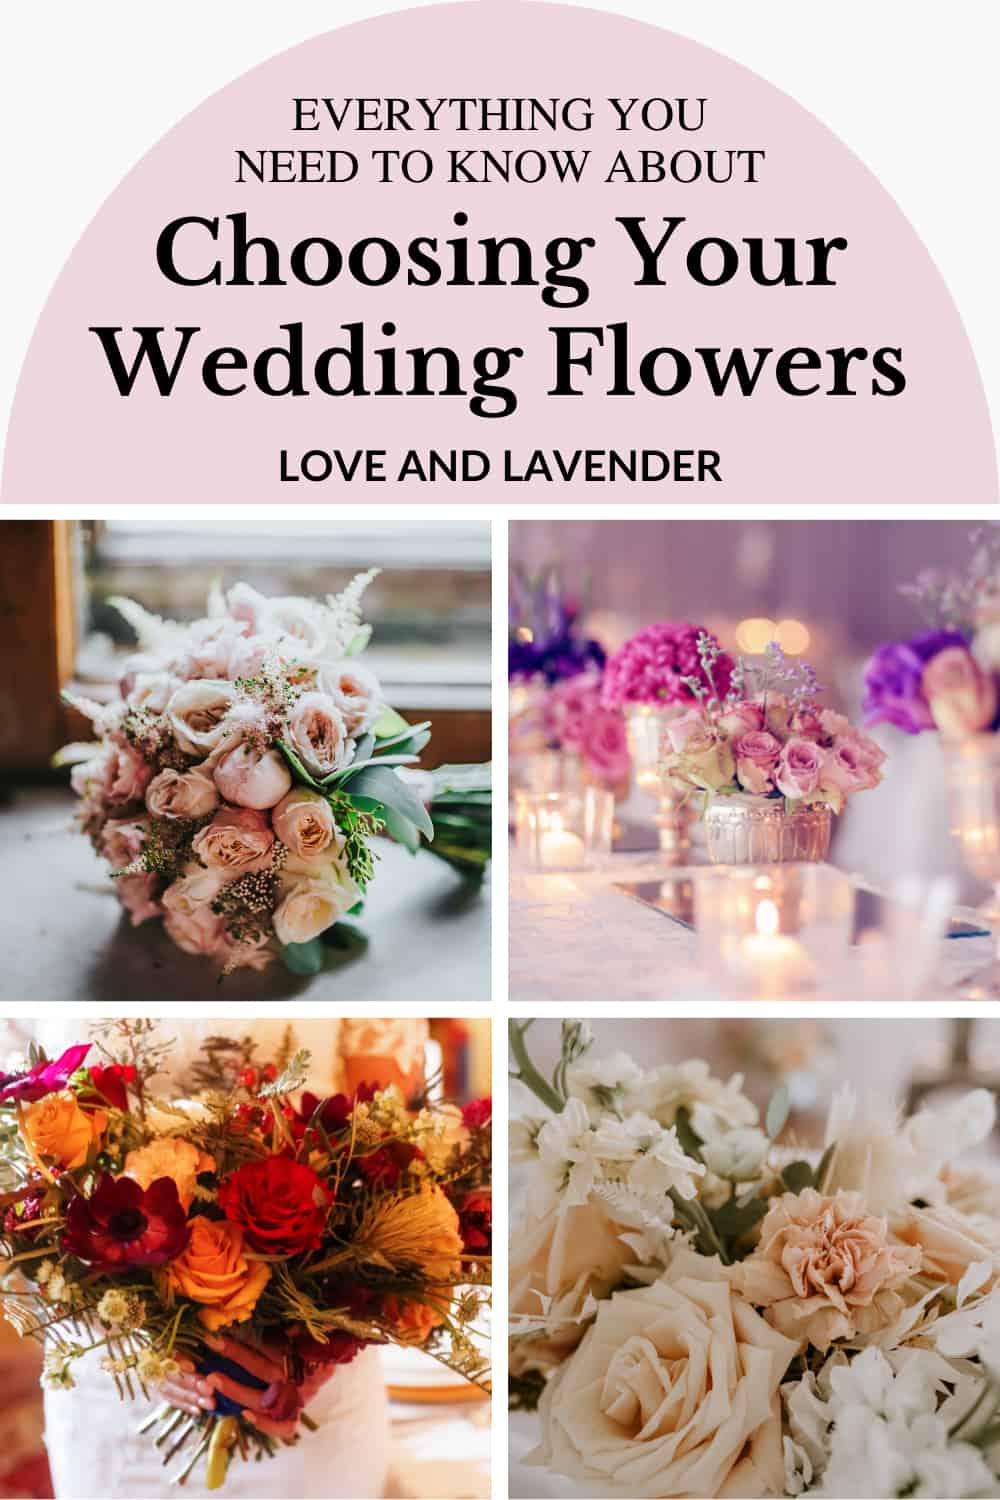 Everything You Need to Know About Choosing Your Wedding Flowers